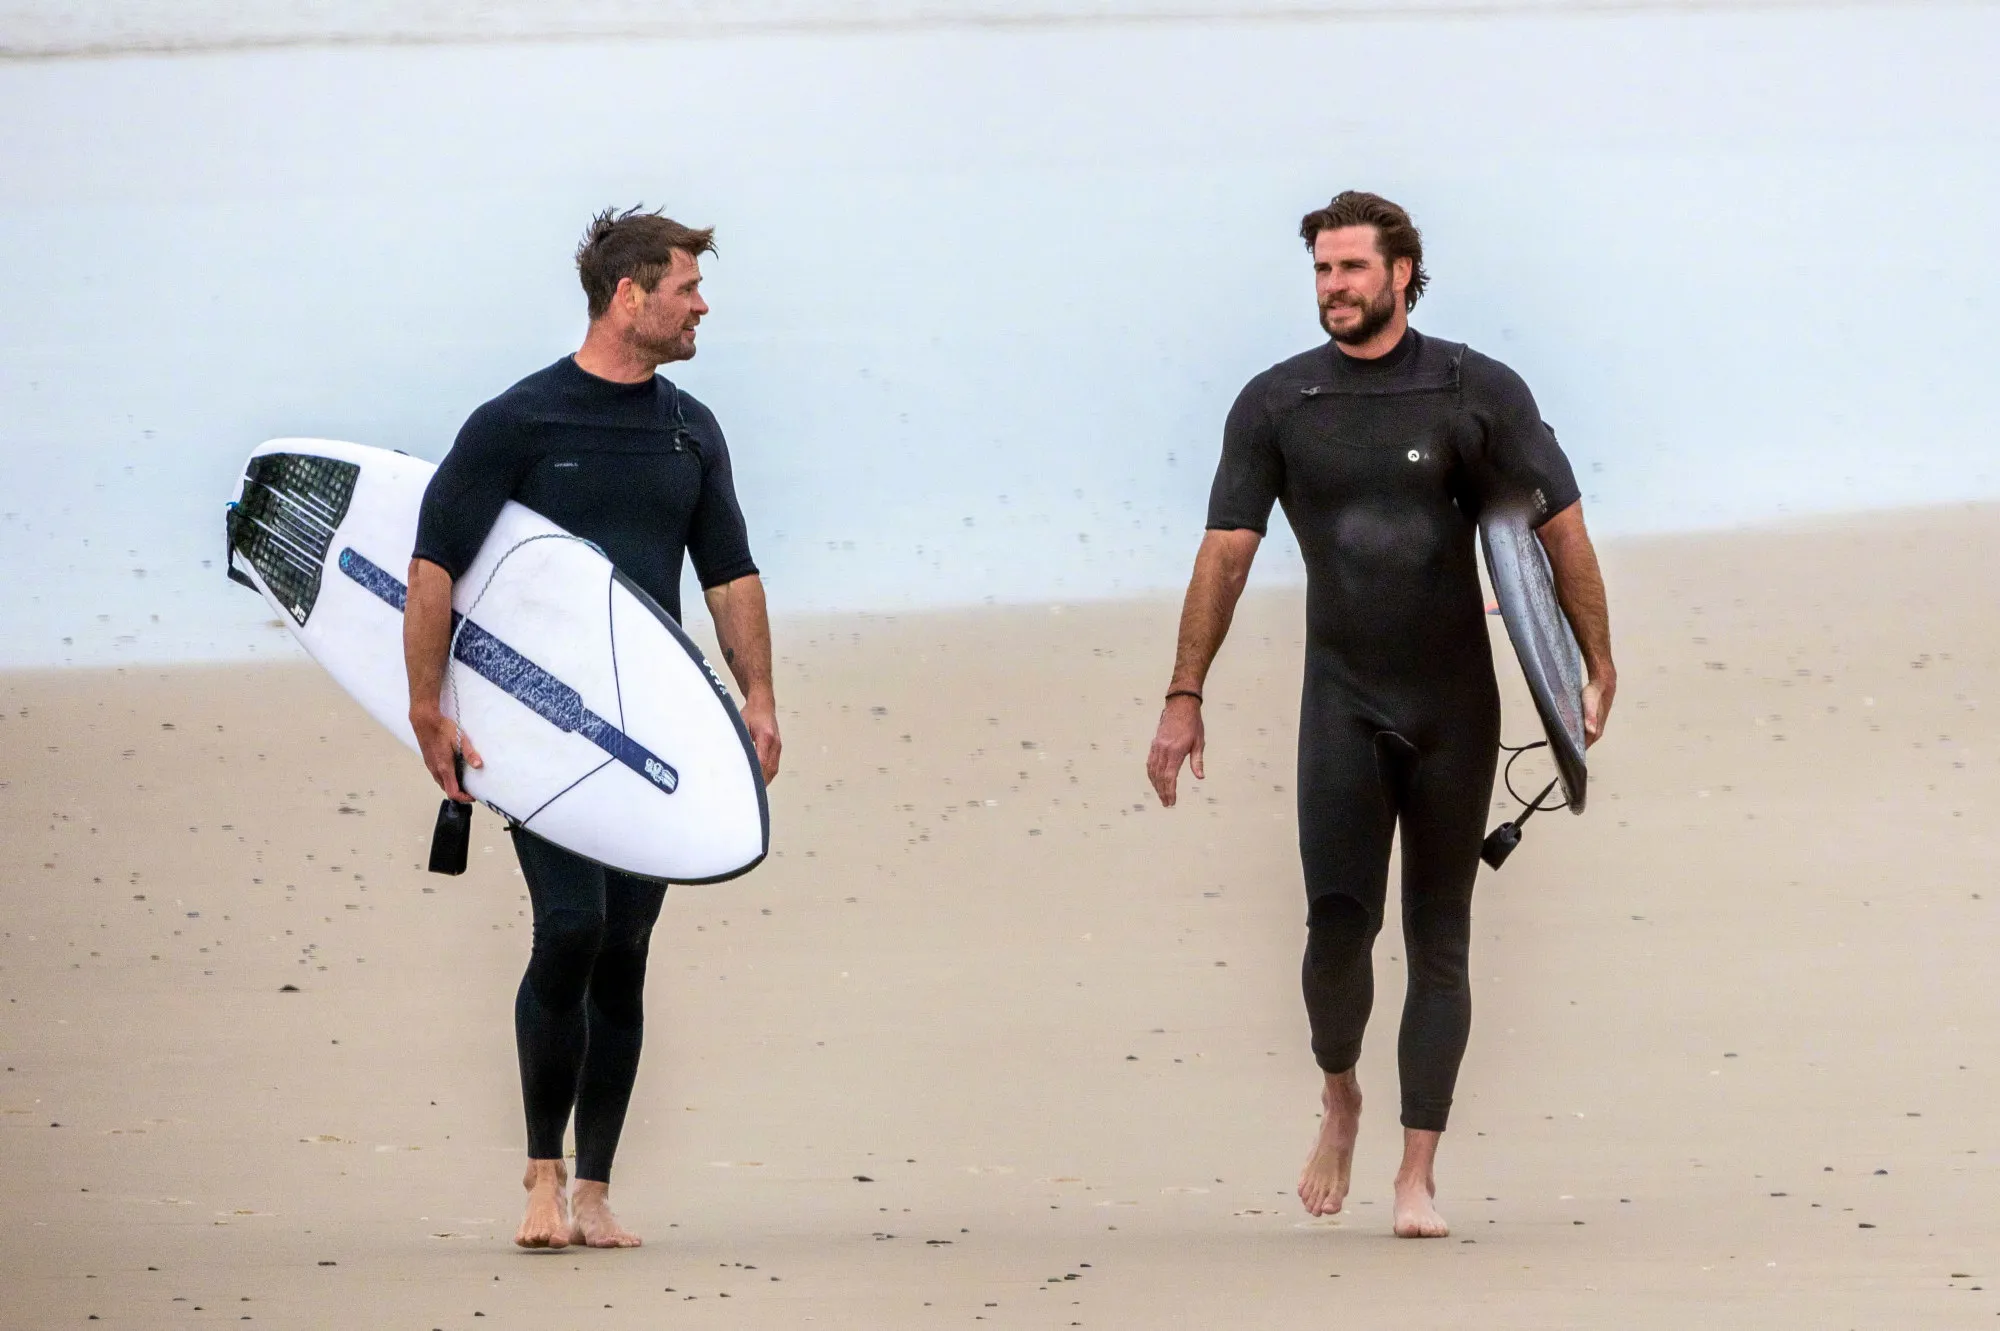 Chris Hemsworth surfing with his family | FMV6